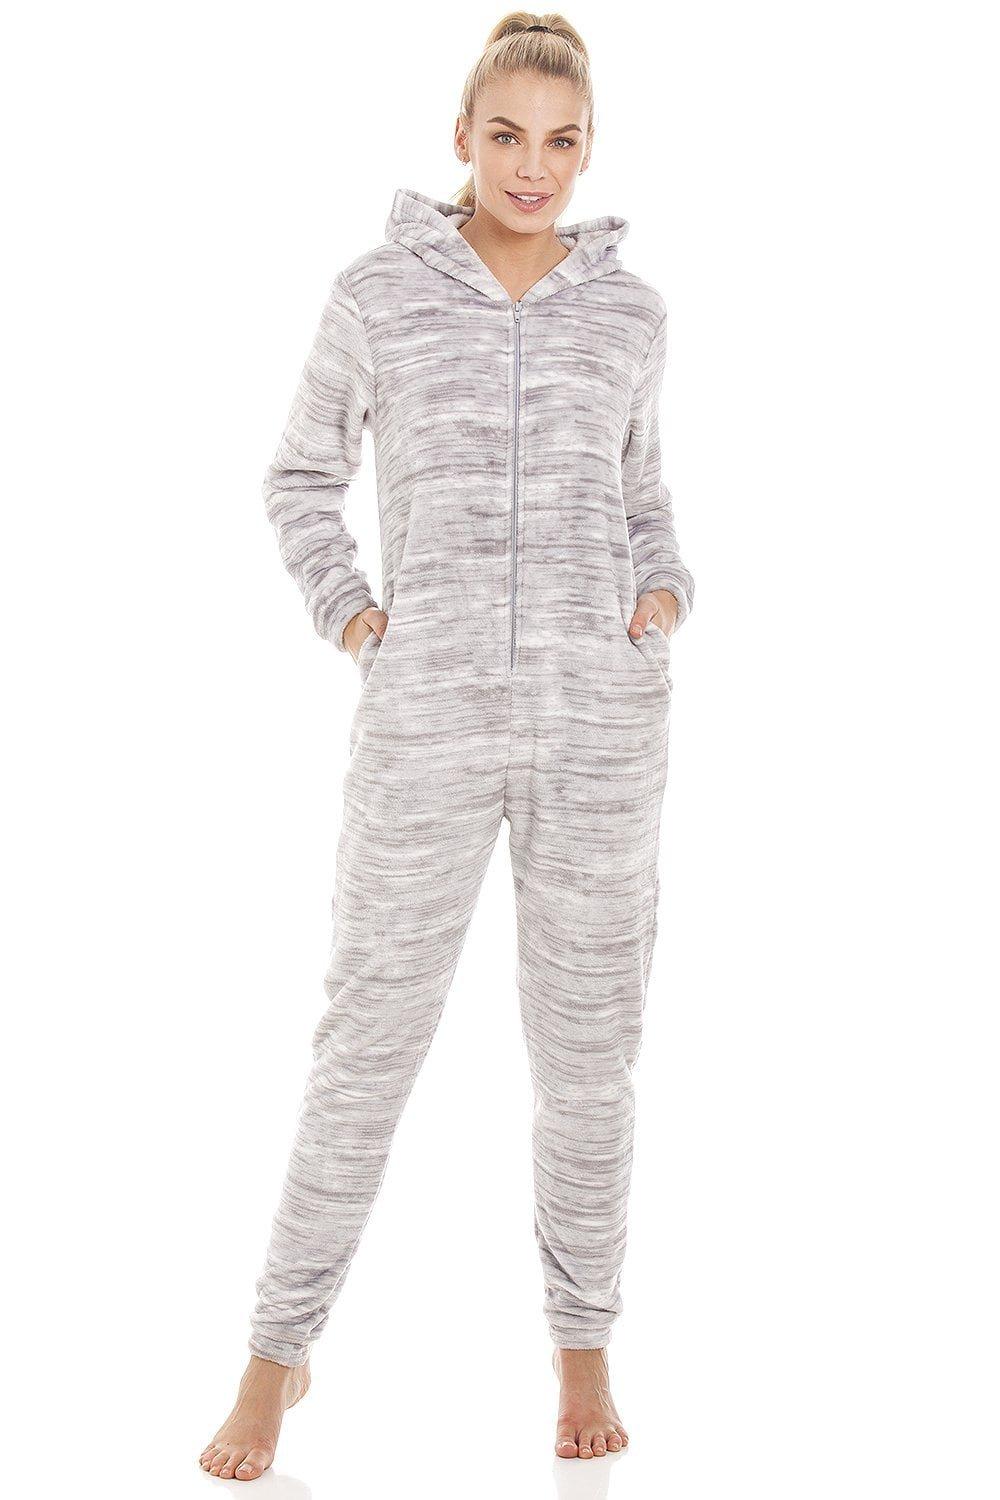 Speckled Supersoft Fleece Hooded All In One Onesie